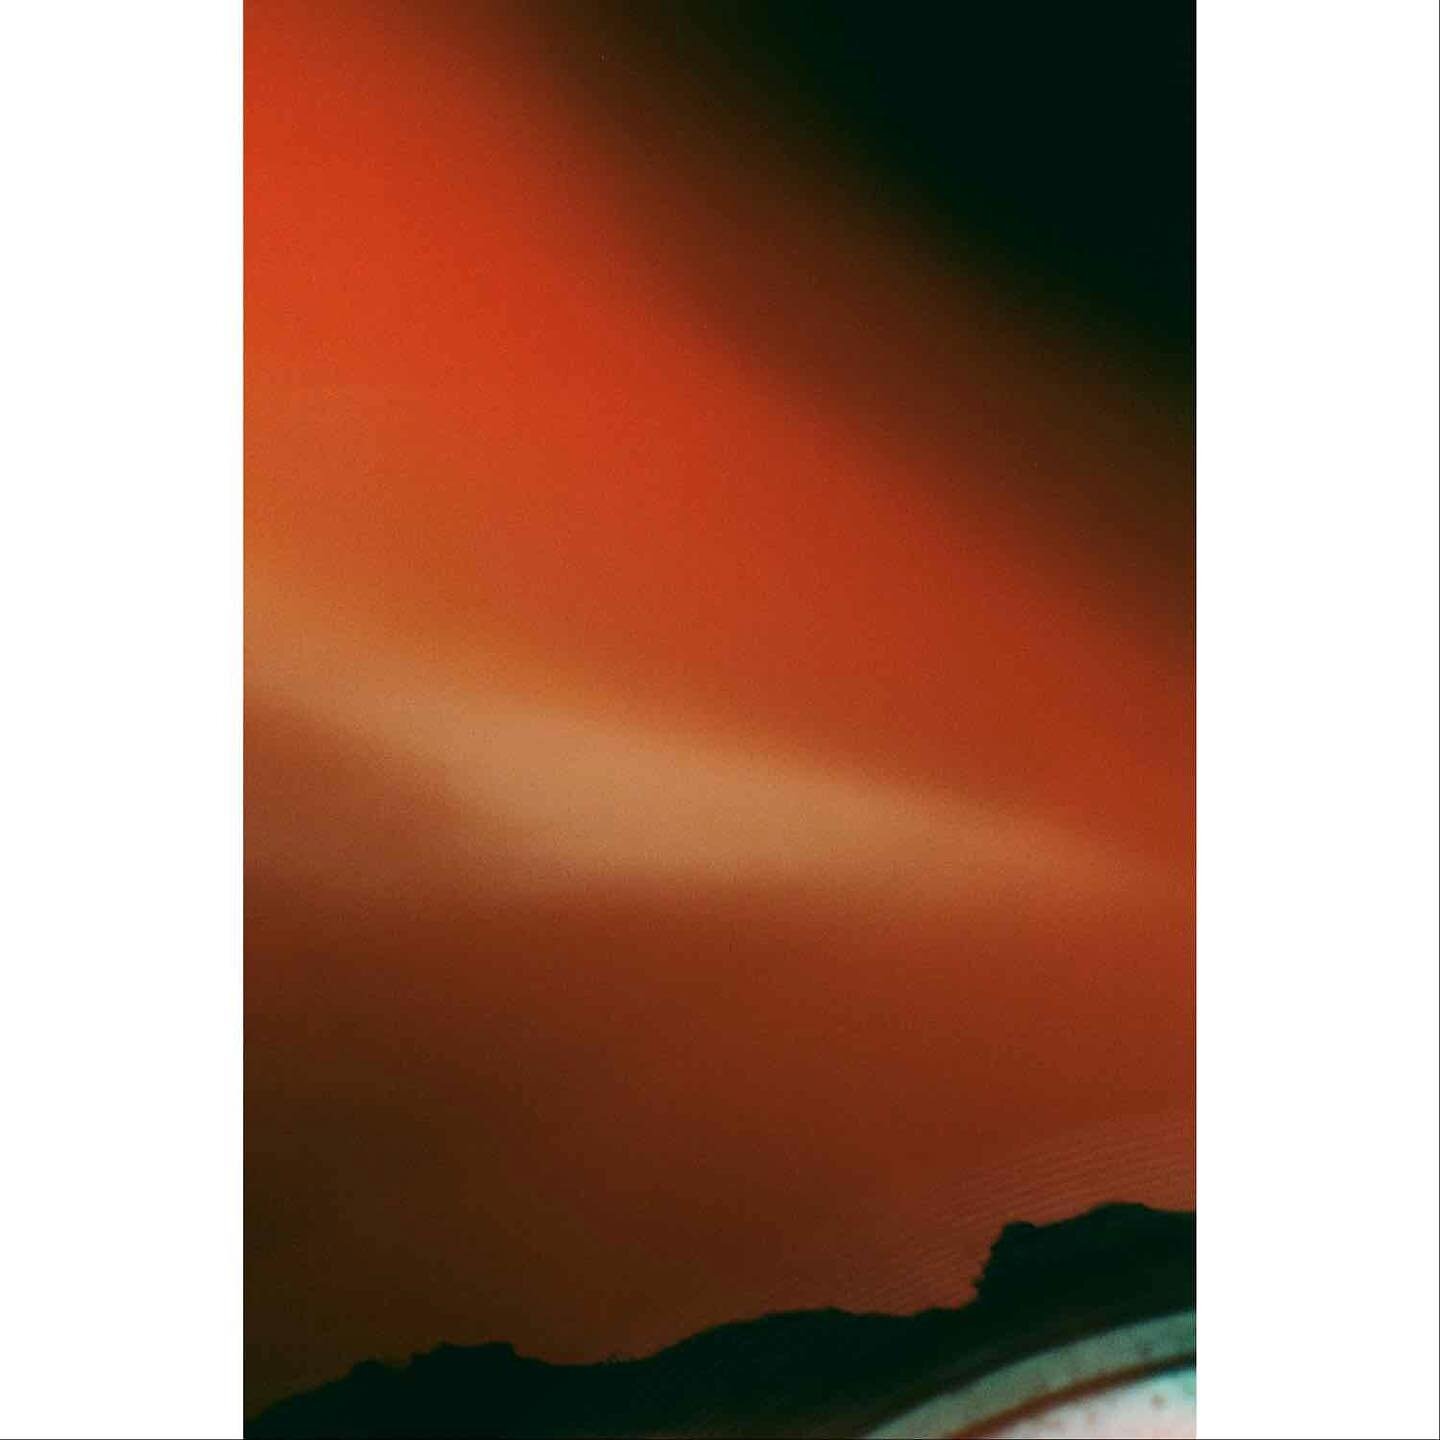 &ldquo;Imagined Landscape #20,&rdquo; 2020. I&rsquo;m excited to share some new work made with an old homemade camera. 
.
.
.
.
.
.
#alternativeprocesses #antiquatedphotography #landscape #landscapephotography #landscapeart #colorfilm #earth #poetry 